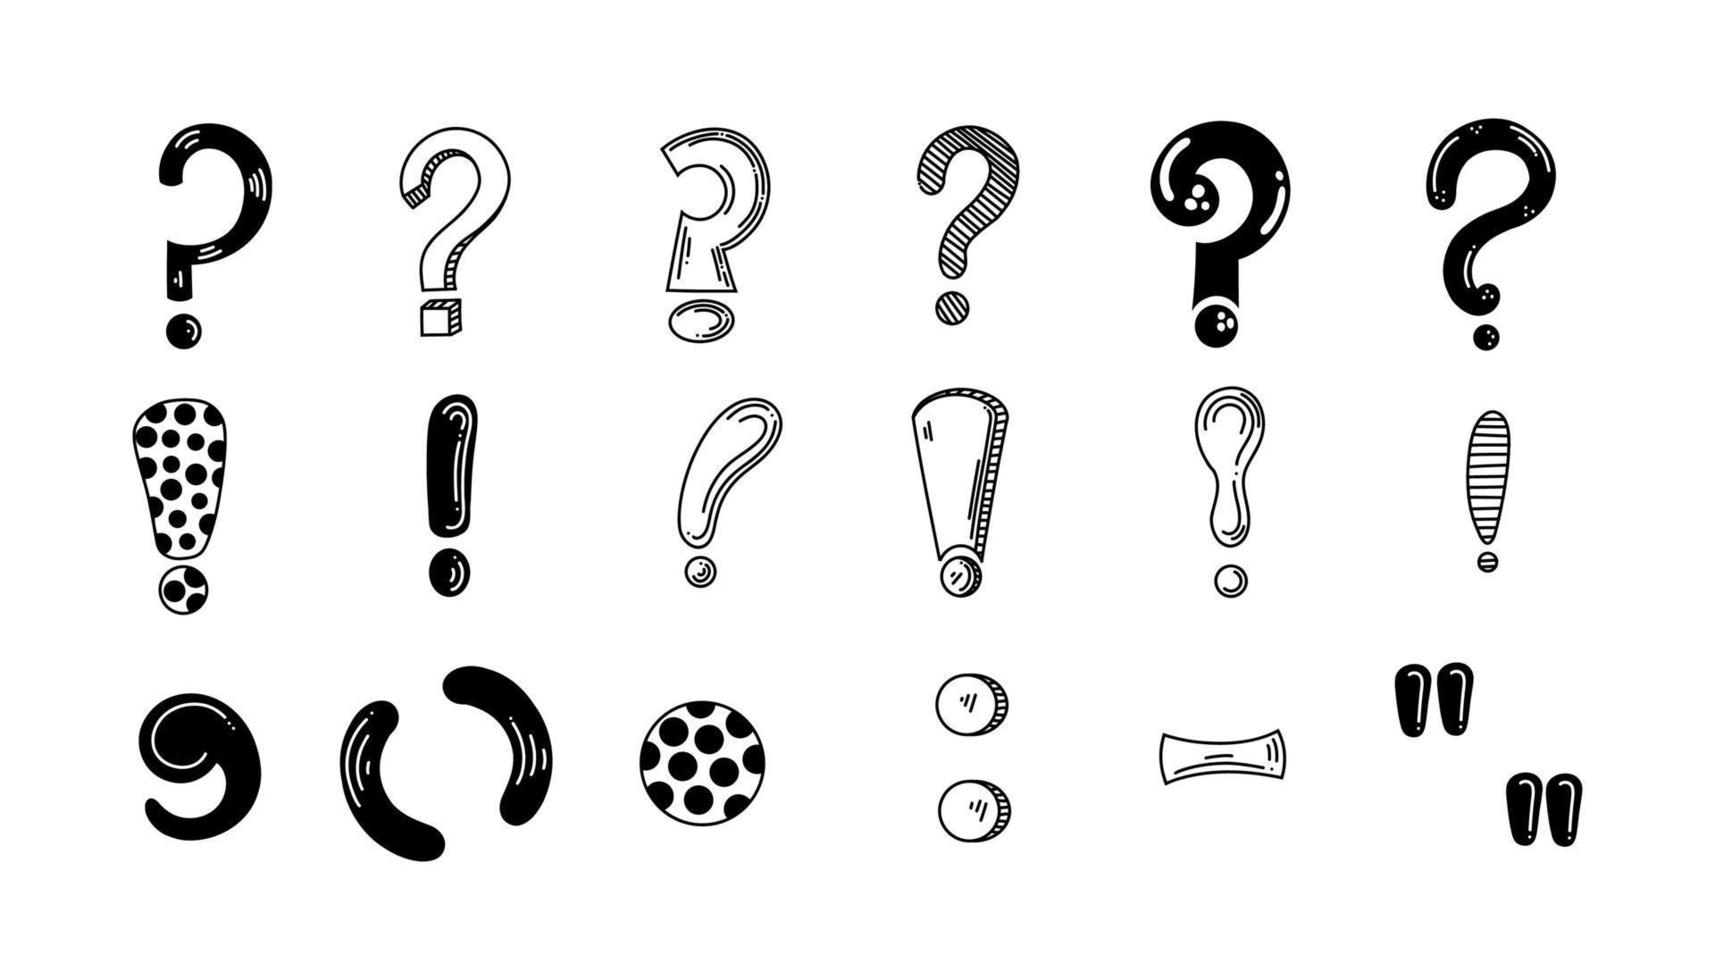 Punctuation marks icons. Set of black double symbols for citation, chat, dot, exclamation and comma doodle illustration on white background. Vector. vector